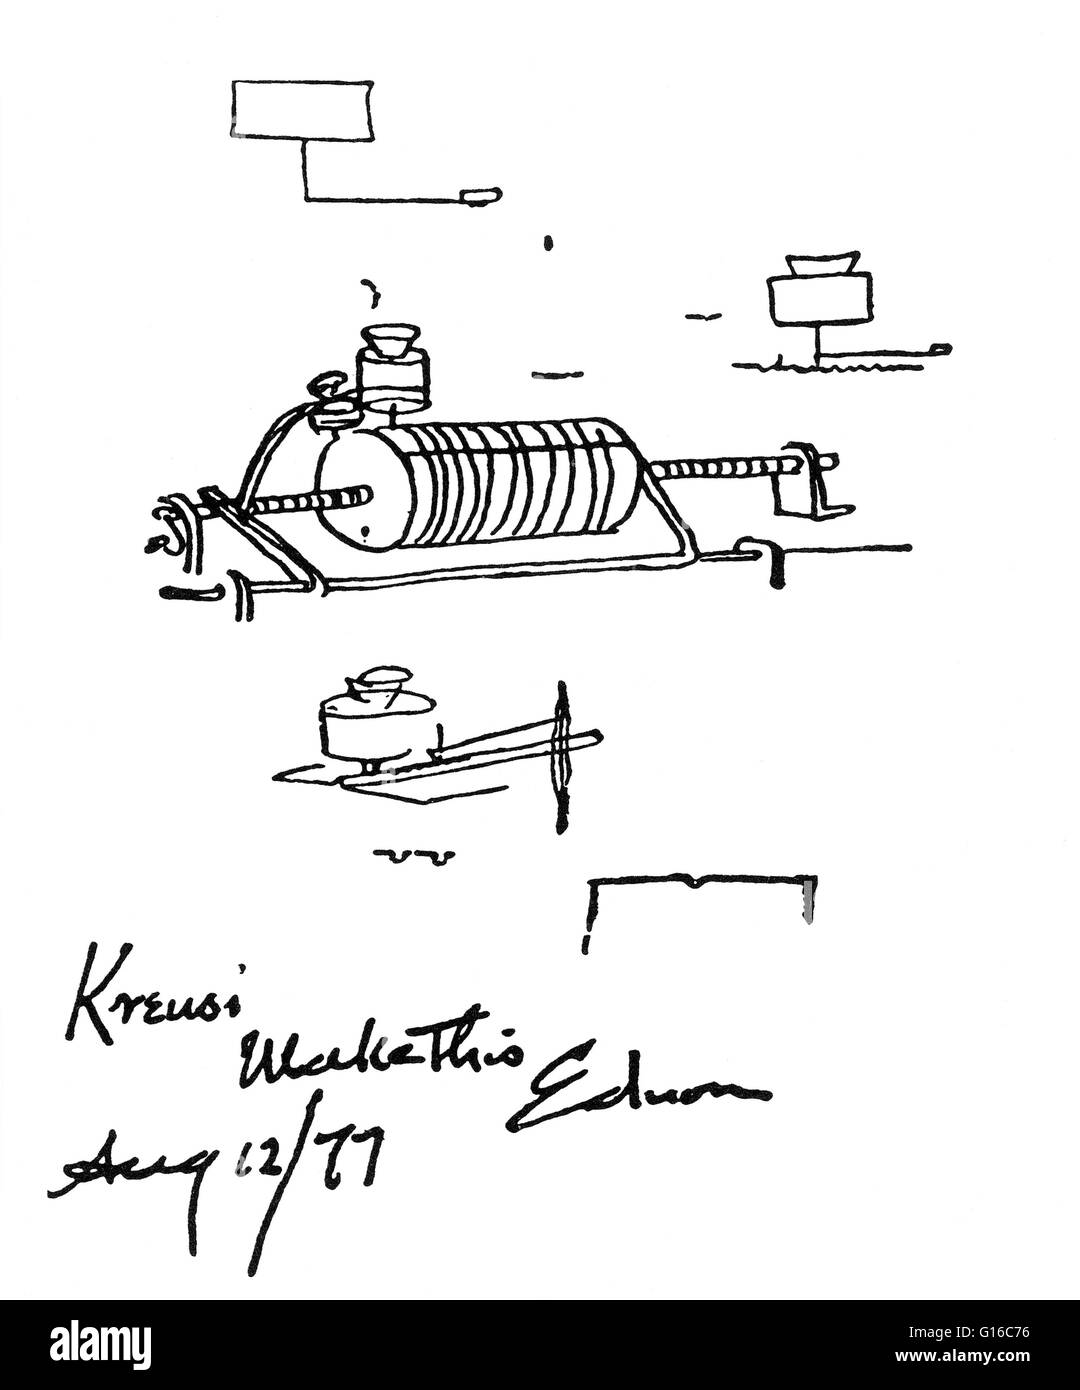 Reproduction of Edison's sketch of the first phonograph with instructions to Kruesi, his modeller, to 'make this'. The phonograph was invented in 1877 by Thomas Edison. While other inventors had produced devices that could record sounds, Edison's phonogra Stock Photo